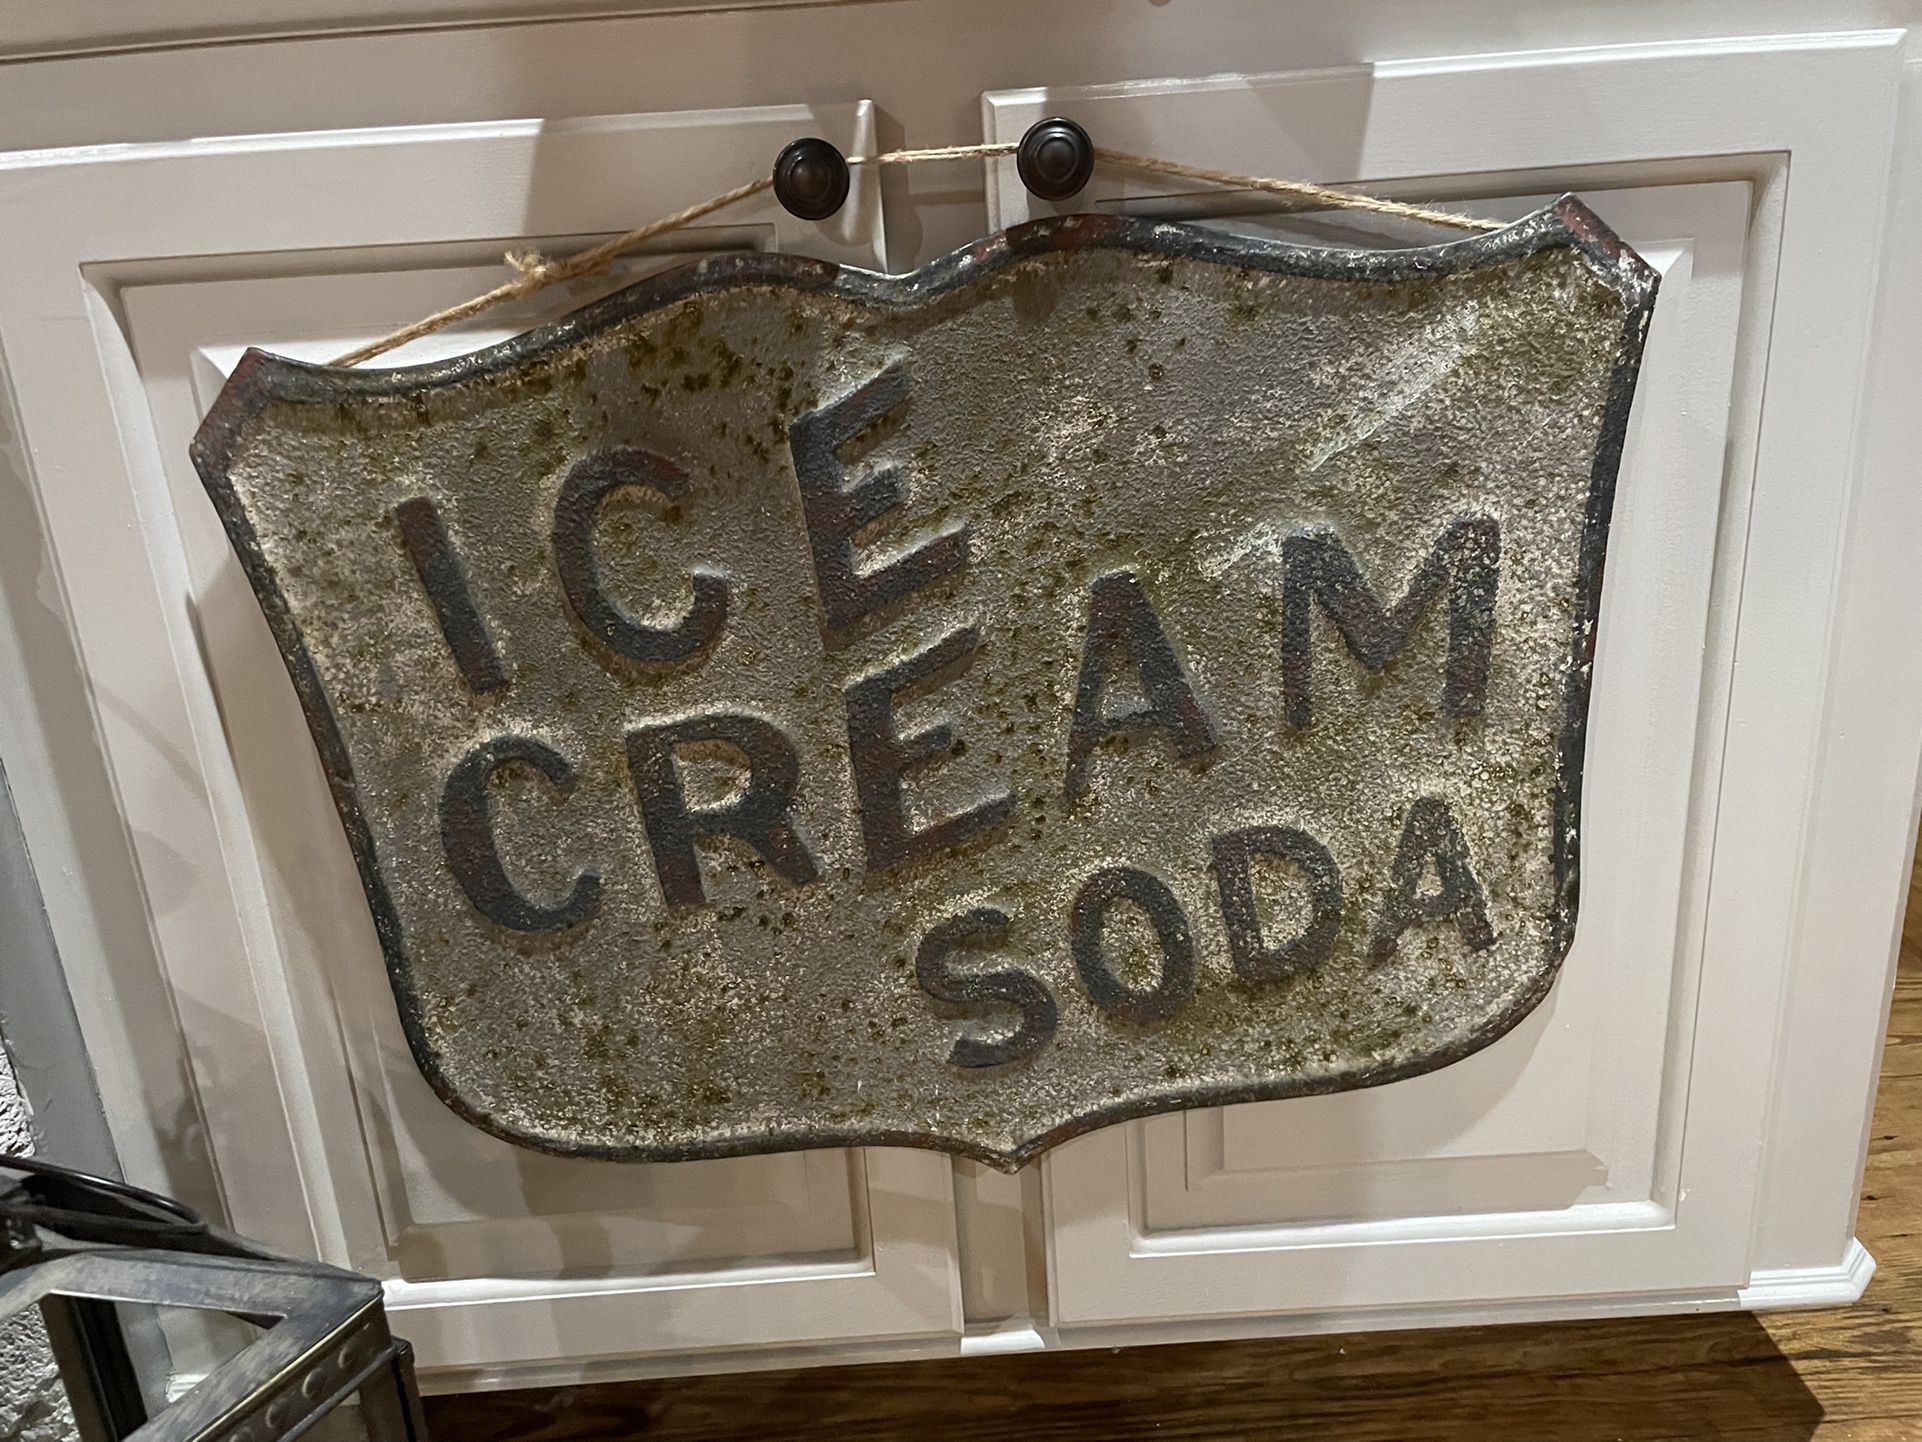 Vintage Ice Cream Soda Advertising Embossed Stamped Letters Sign  Antique Finish Rusted 26Wx 20H